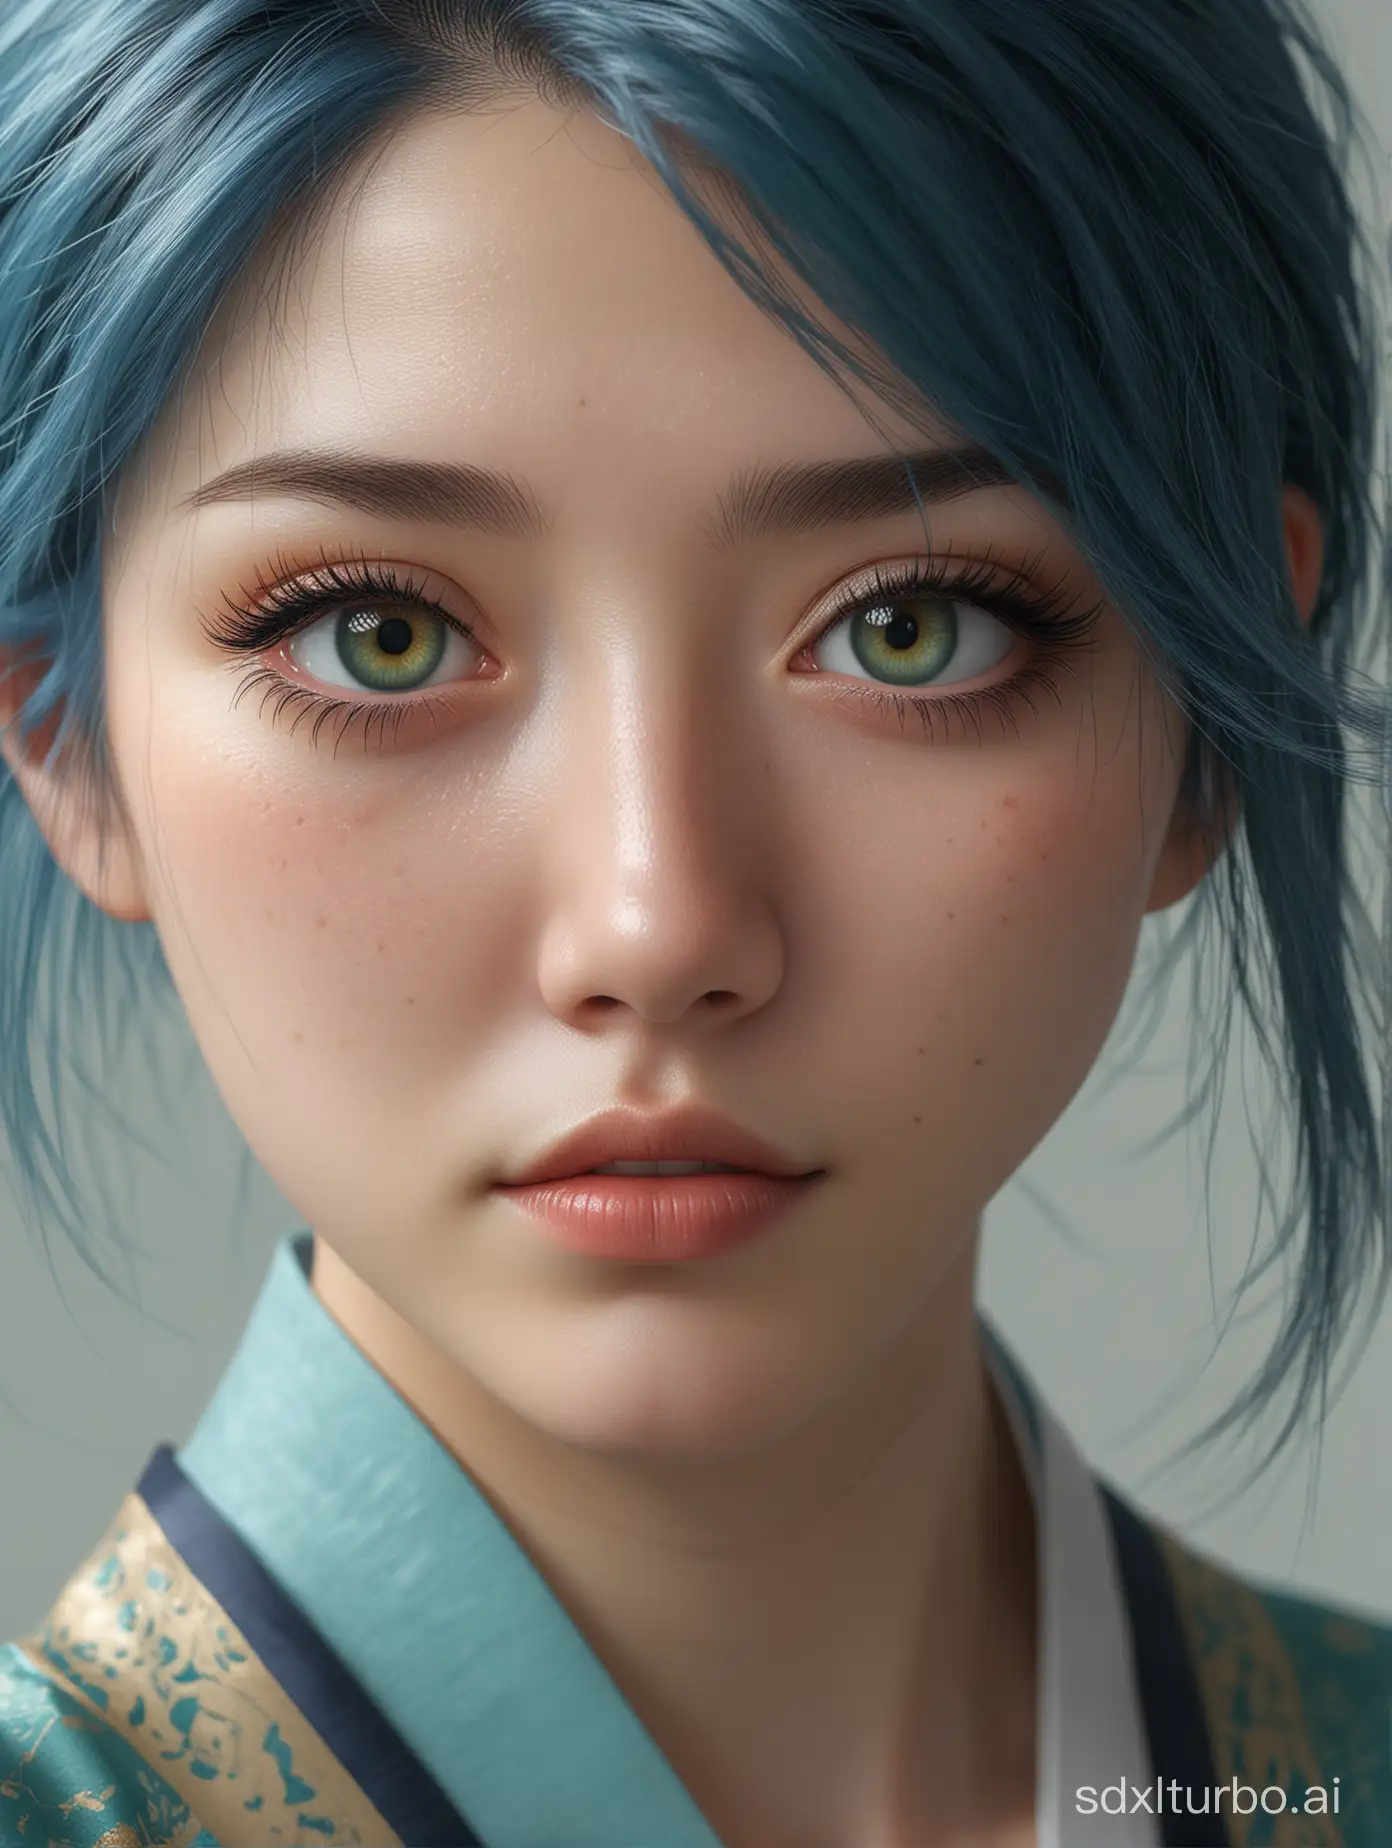 Hyperrealistic-Illustration-of-a-Solo-Girl-in-Traditional-Hanfu-Attire-with-Blue-Hair-and-Heterochromic-Eyes